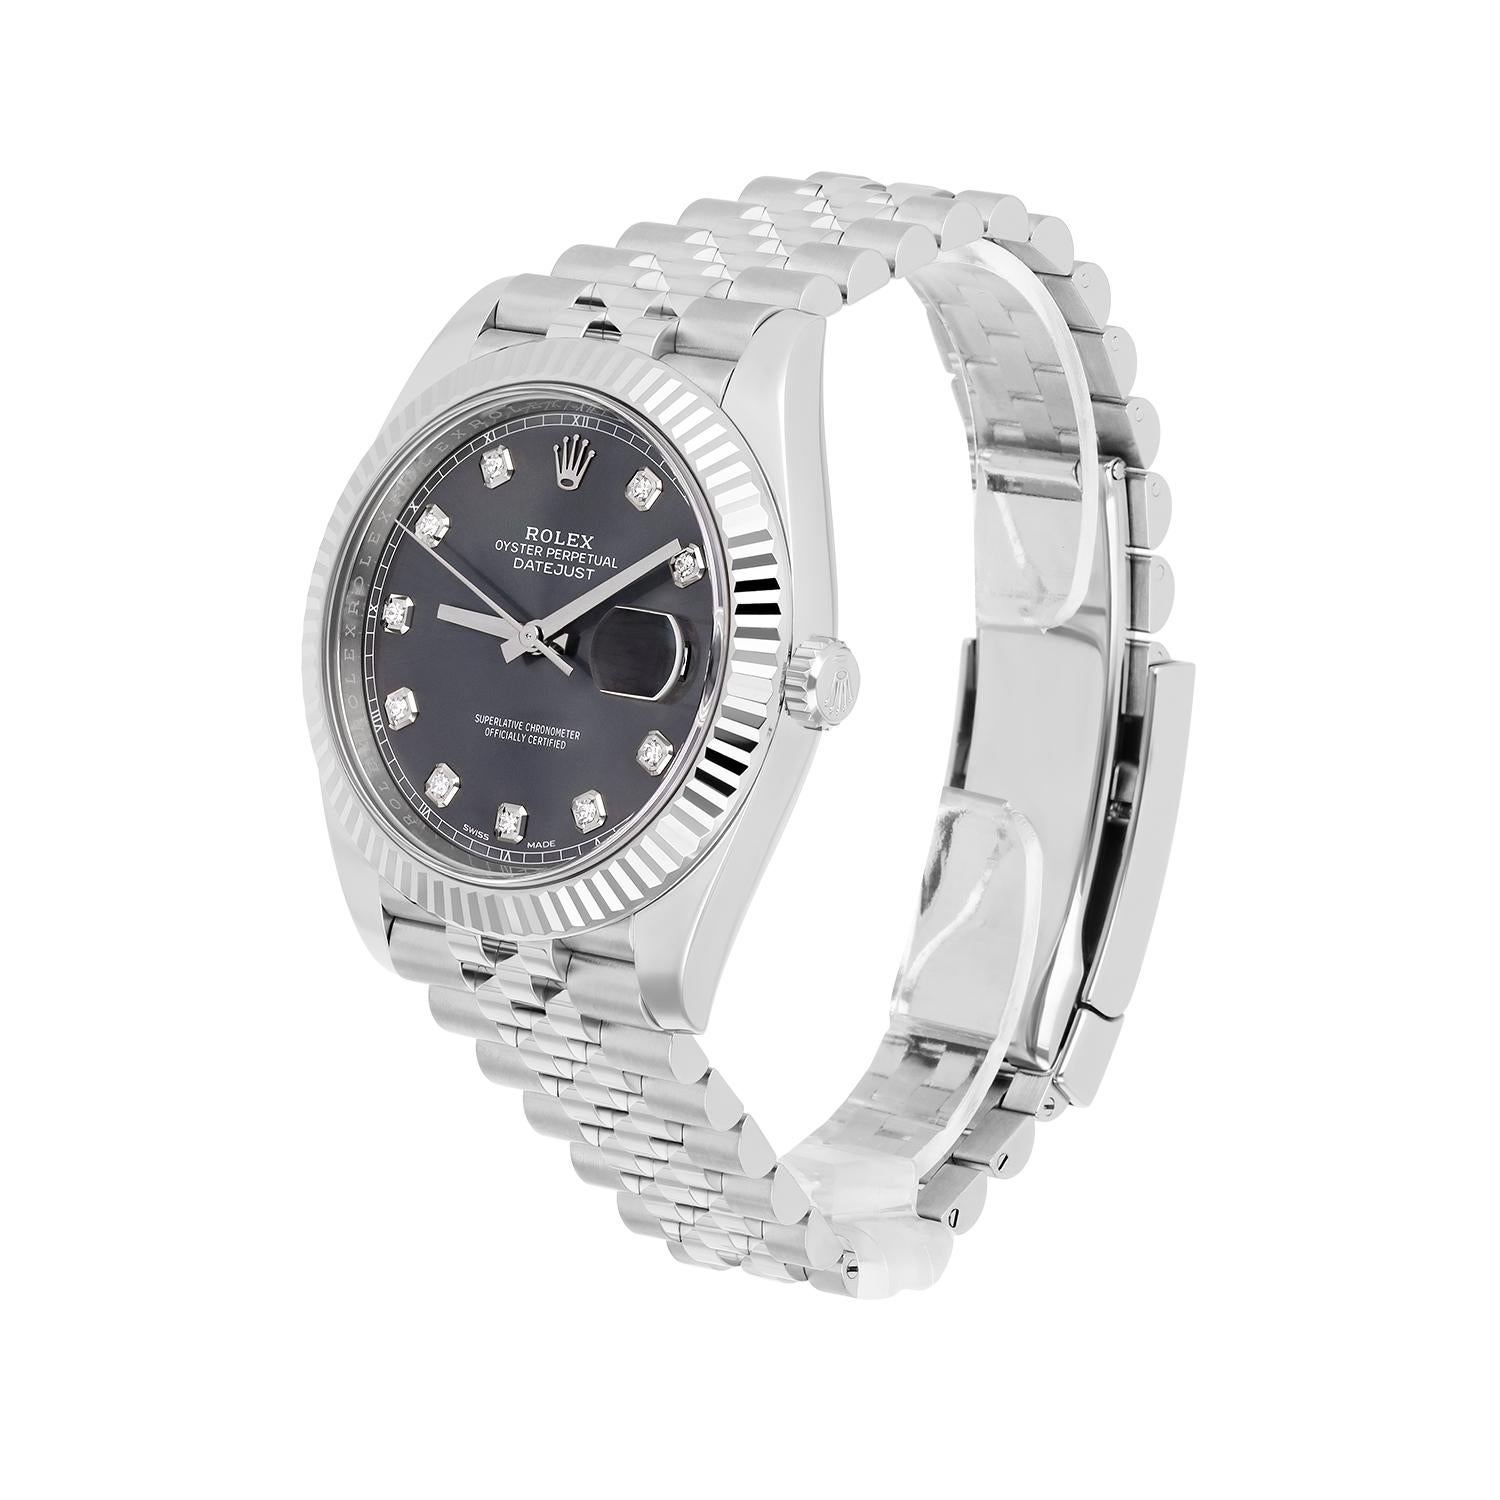 Rolex Datejust 41mm Jubilee Stainless Steel Watch Rhodium Diamond Dial 126334 For Sale 2